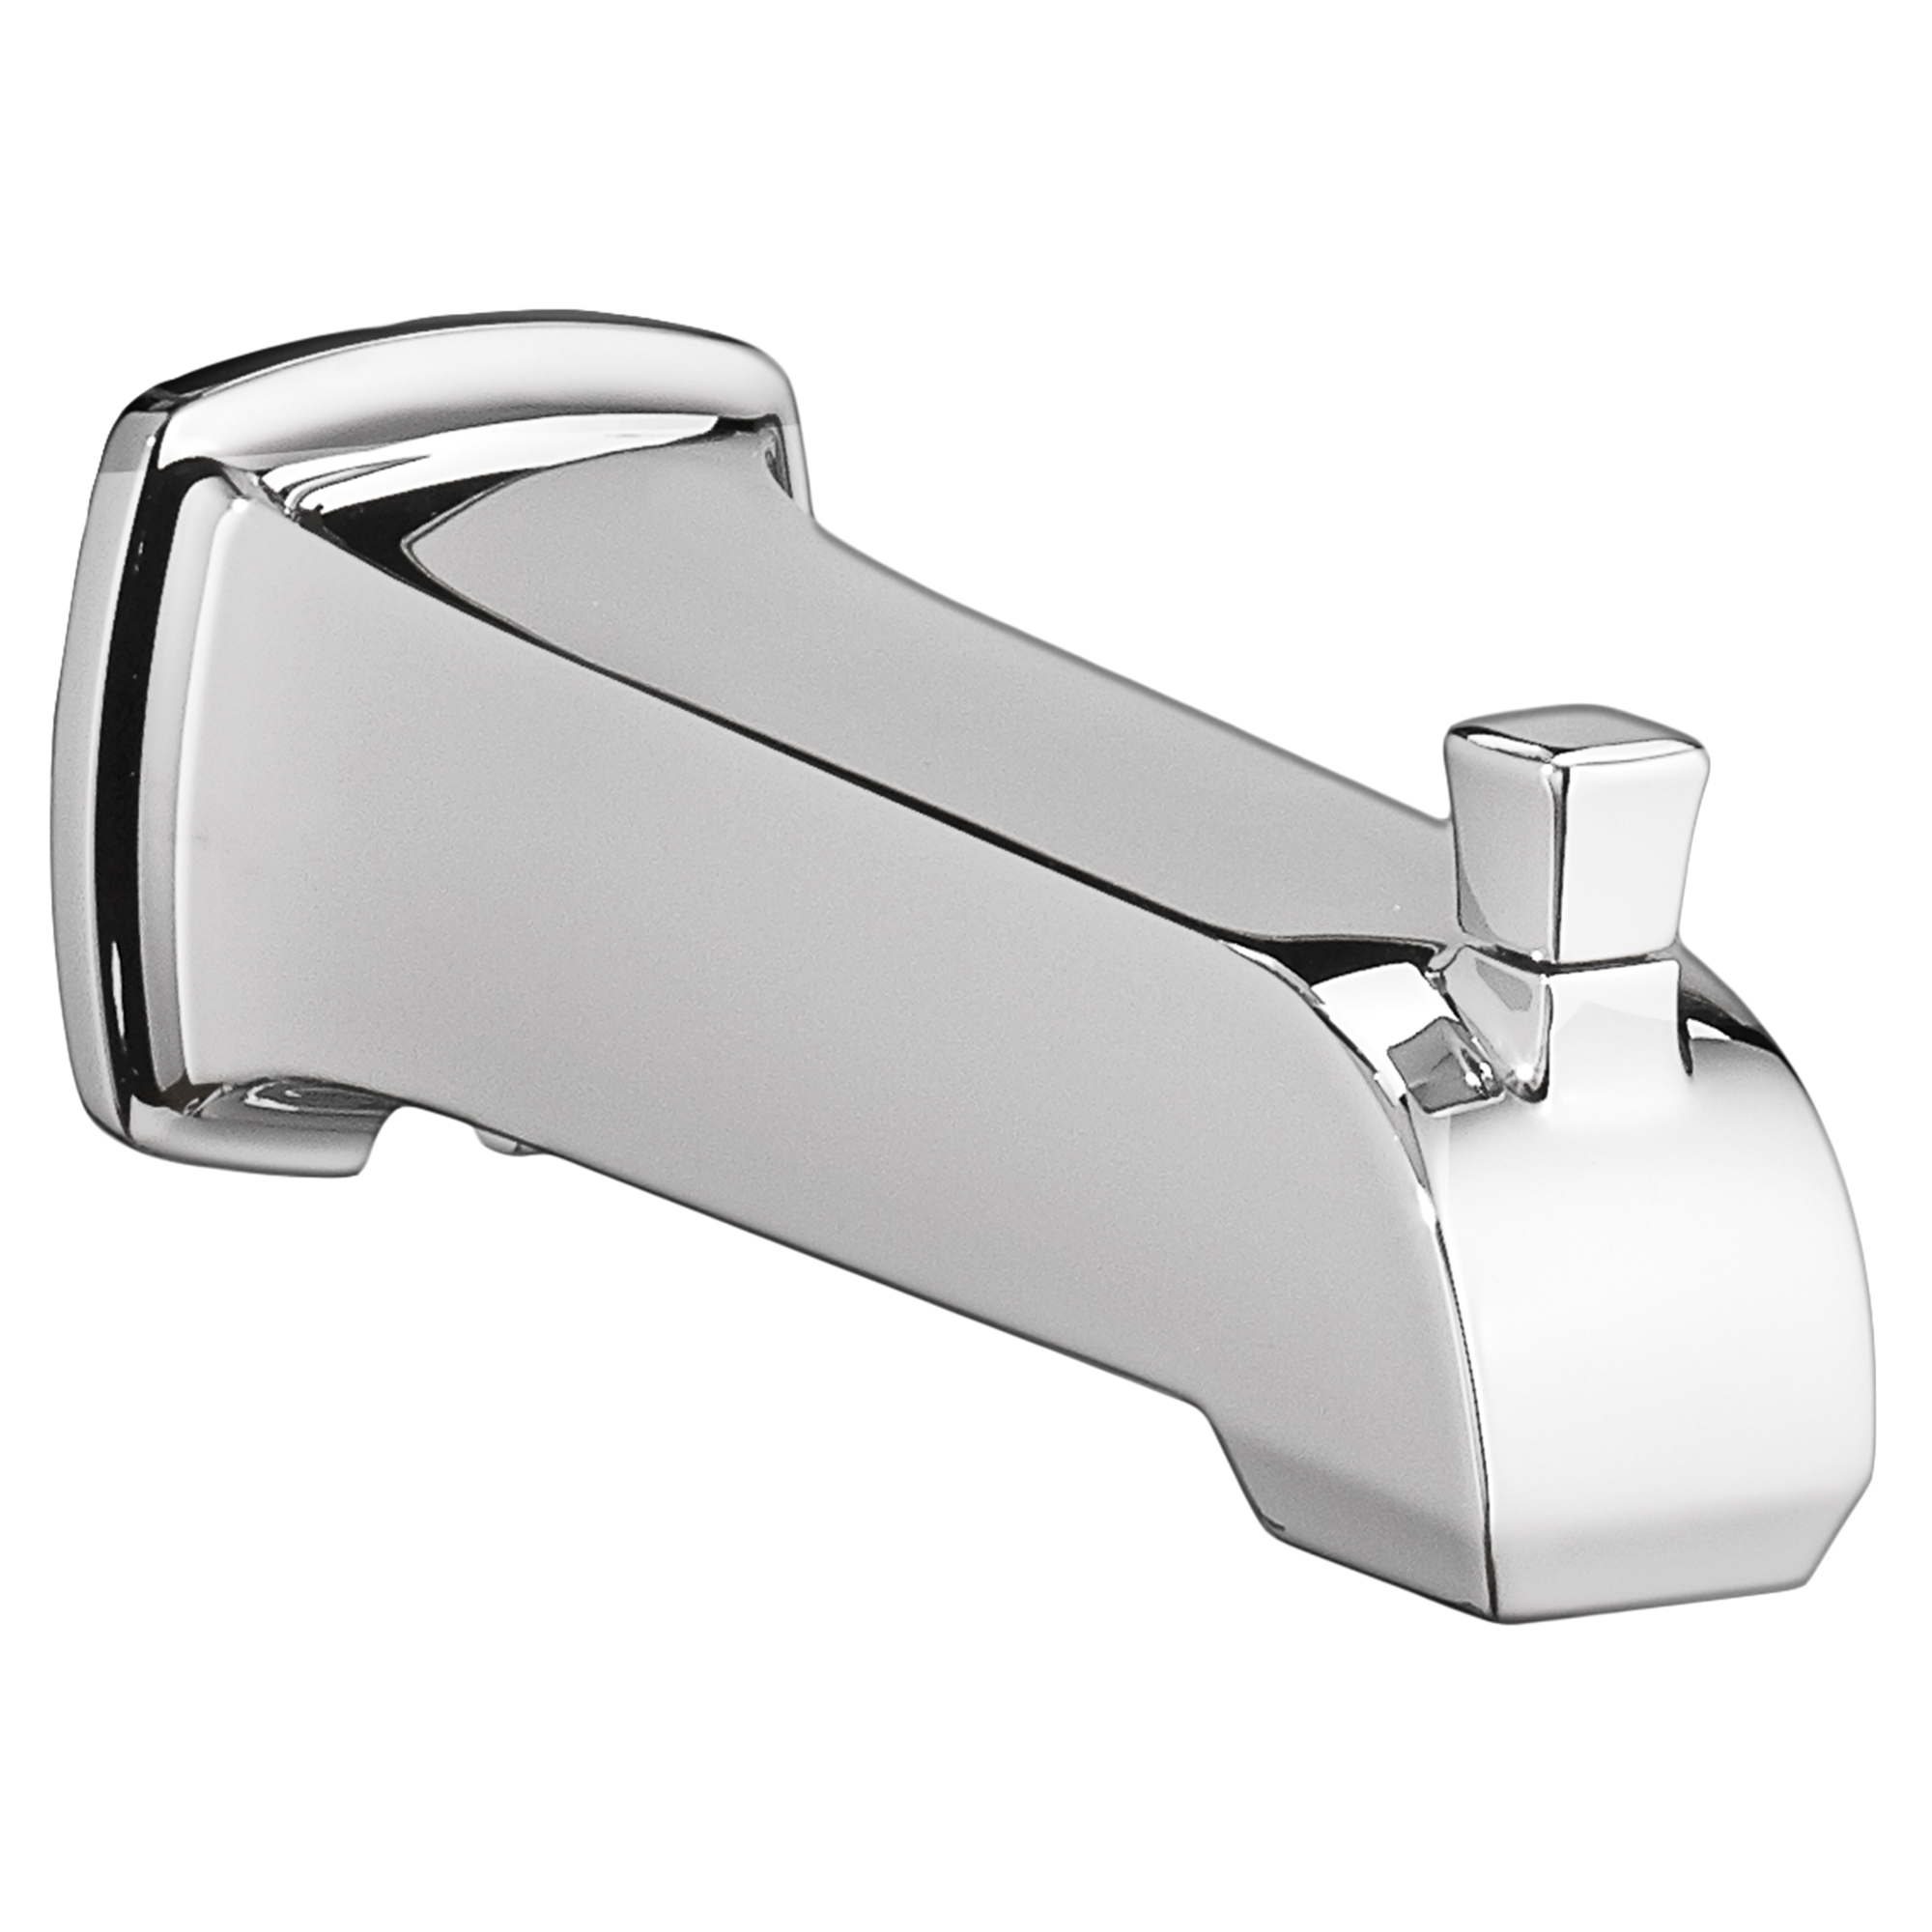 Townsend™ 6-1/2-Inch IPS Diverter Tub Spout